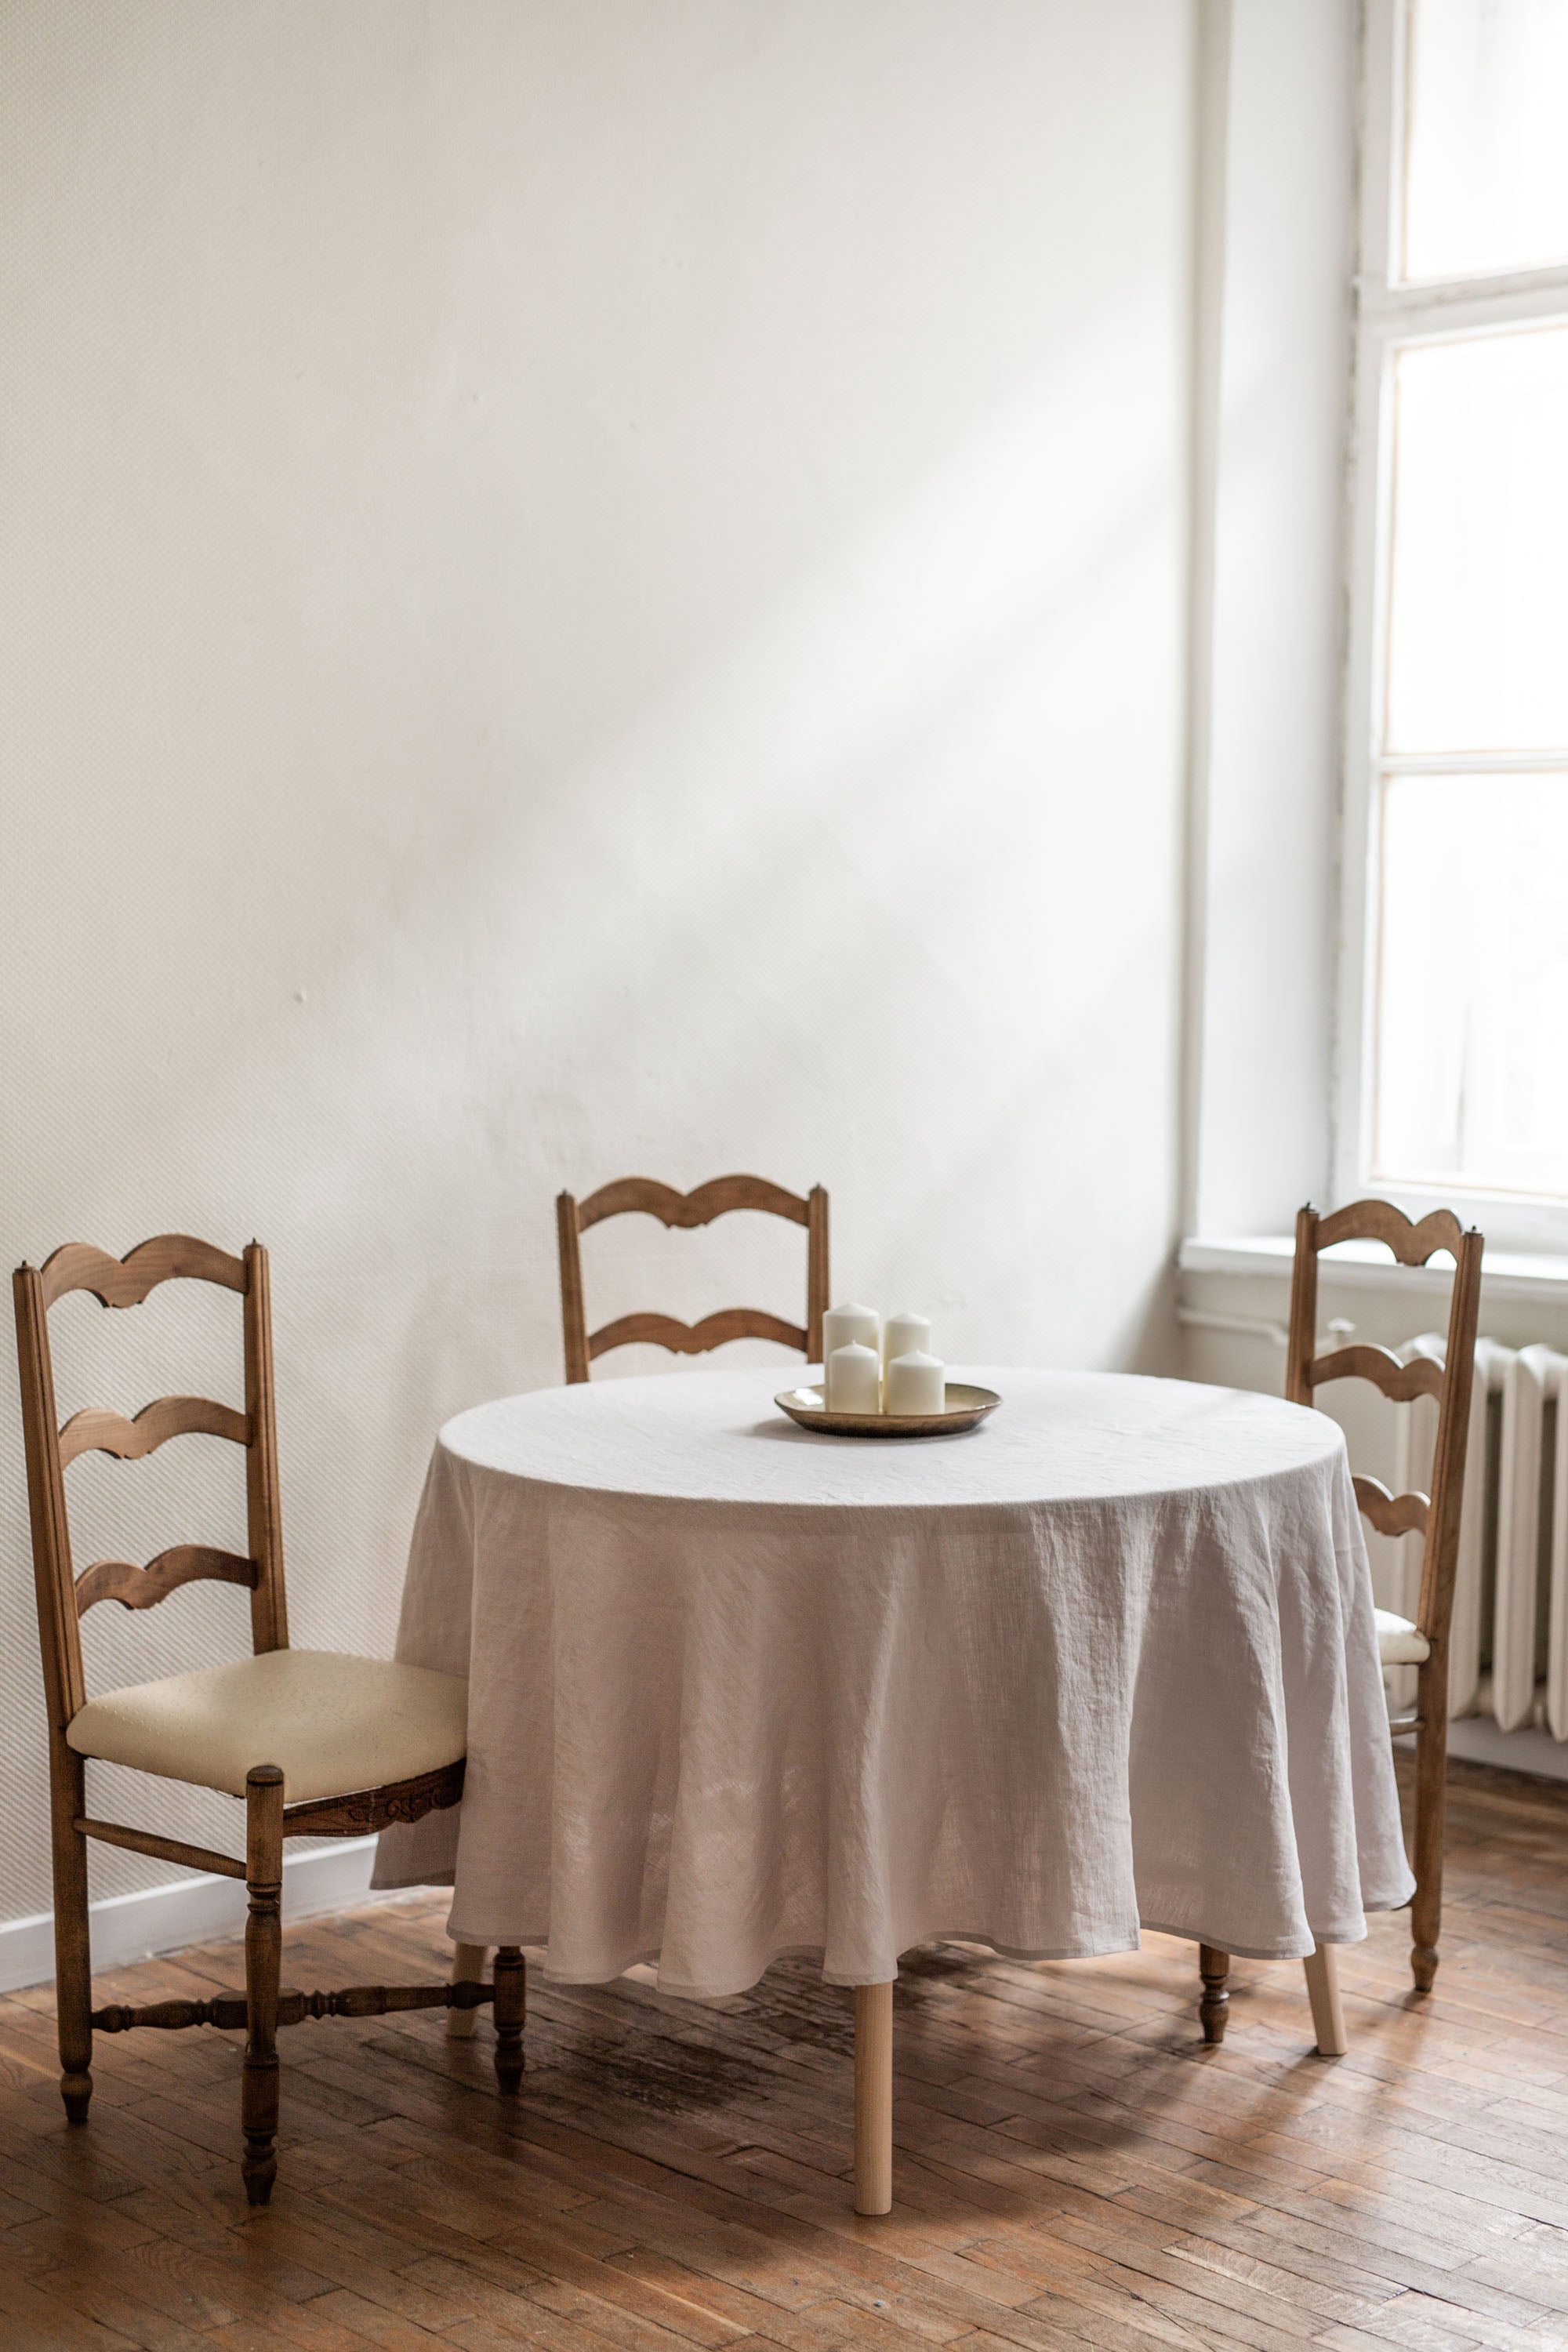 Rustic Dinner Table With Cream Linen Round Tablecloth By AmourlInen